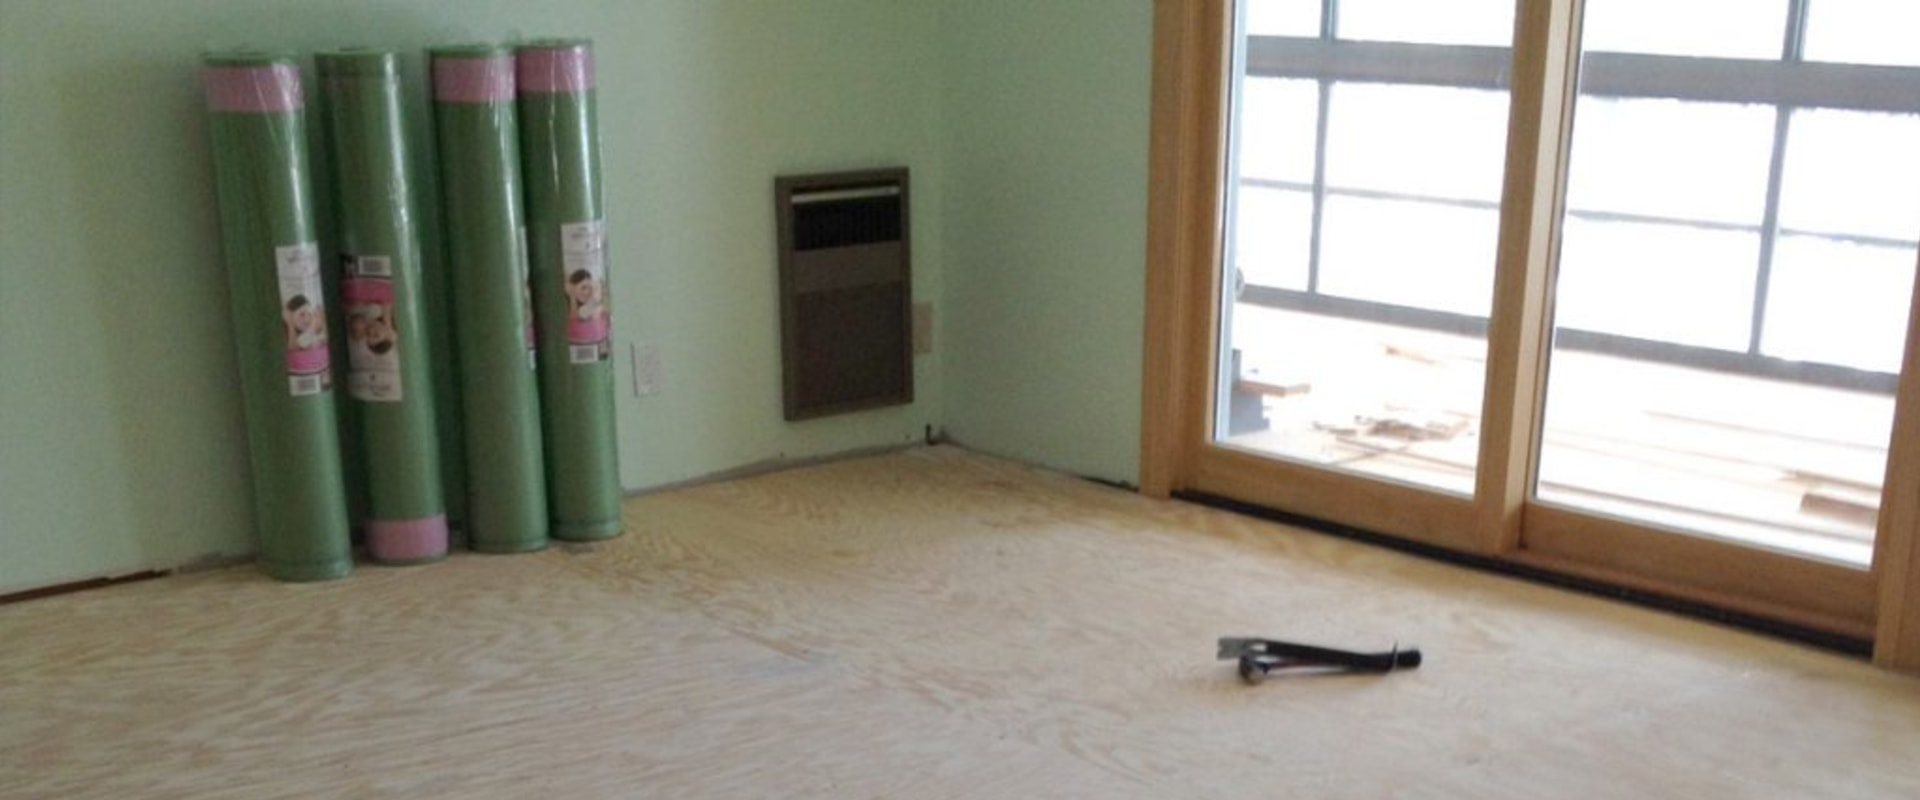 Subfloor Preparation: What You Need to Know Before Floor Installation